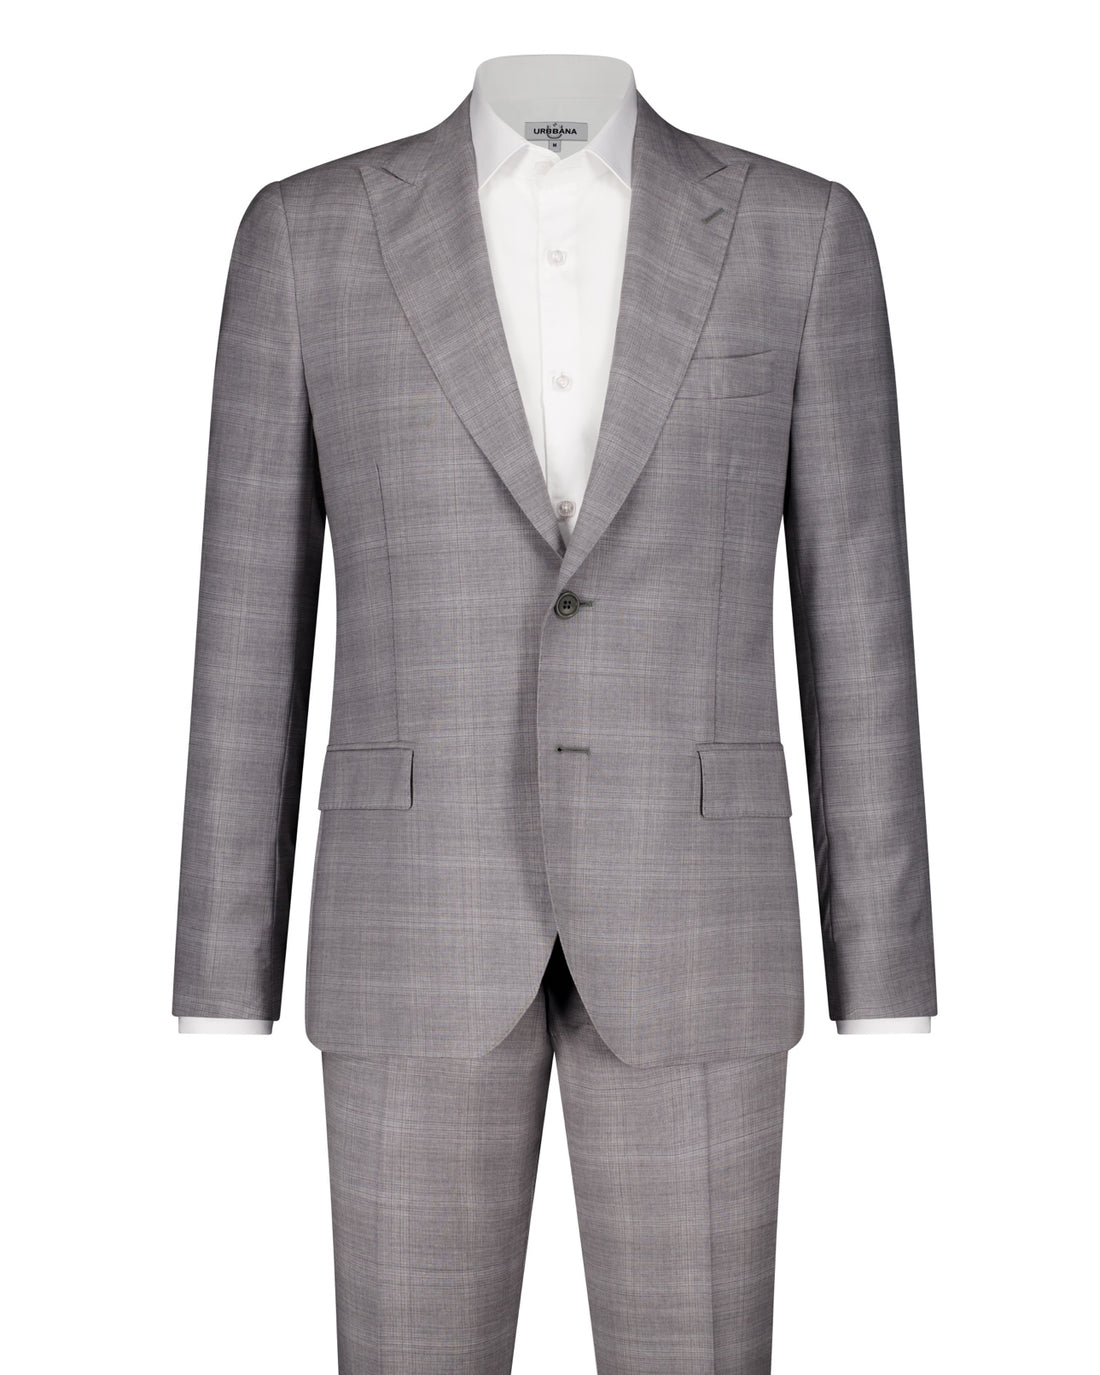 Argento Zegna Cloth Suit - Check Silver - Made In Italy